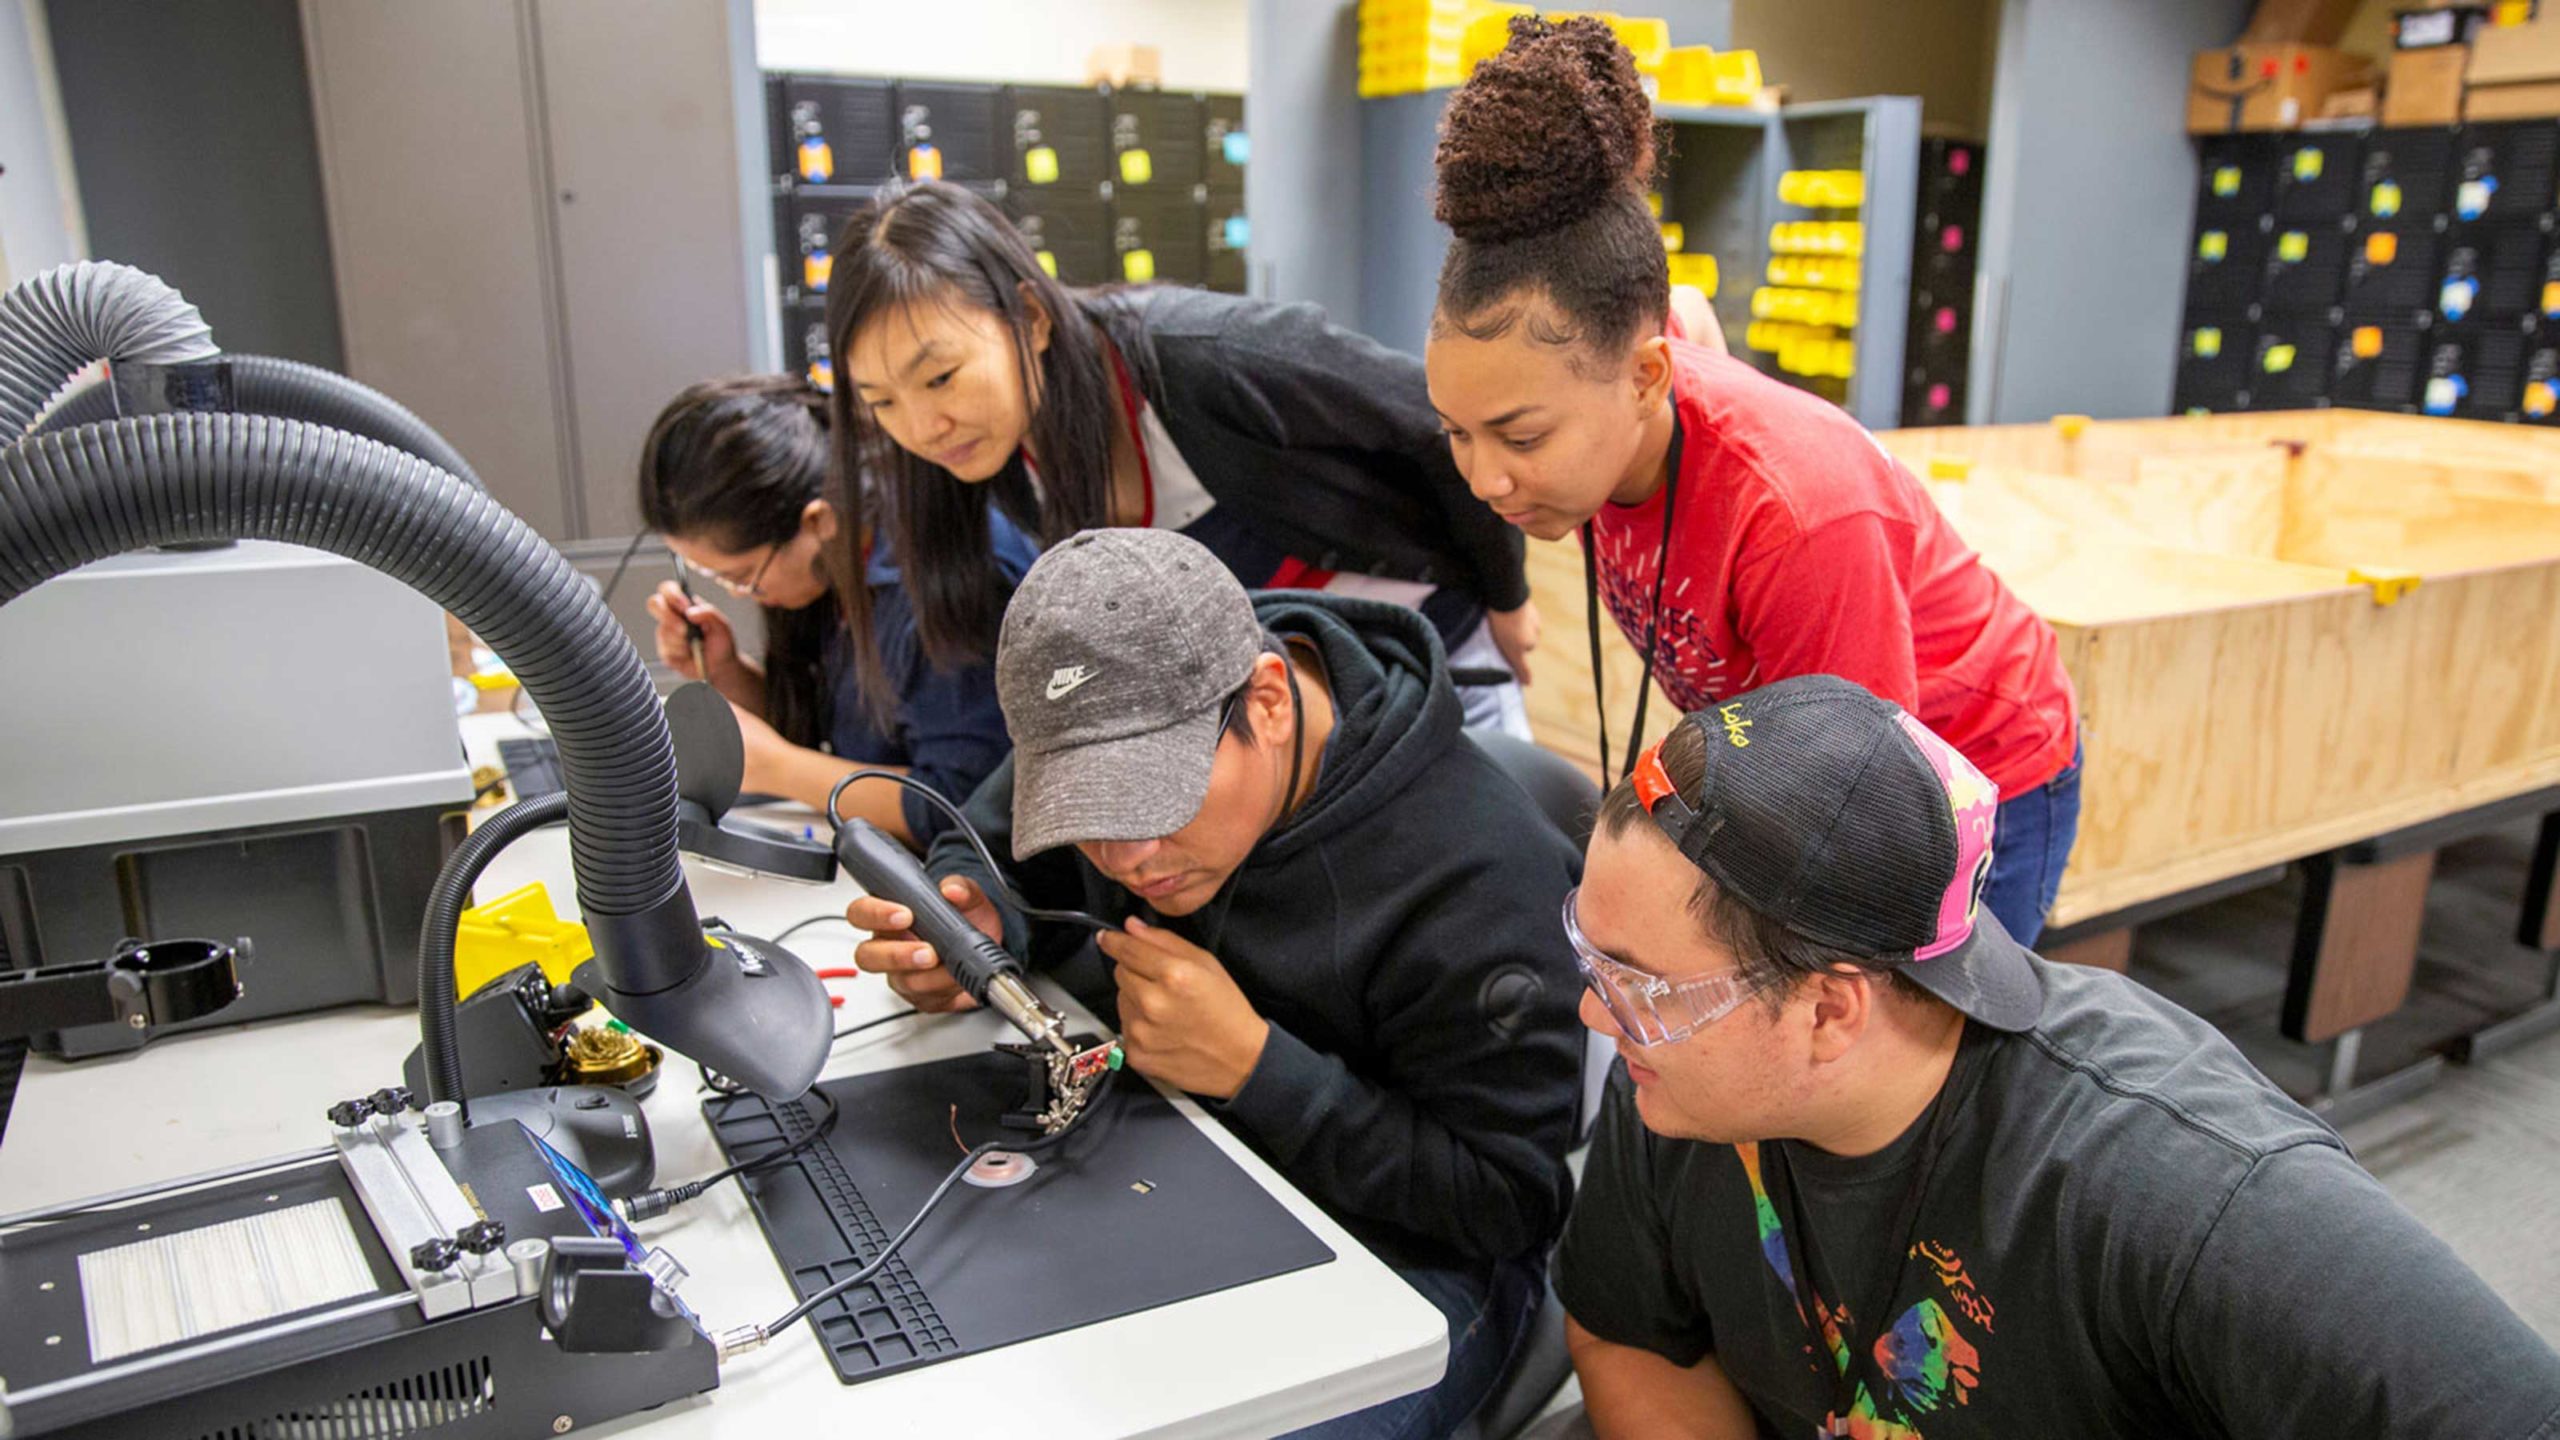 Five undergraduates work together soldering a small robot component at the ASU 2019 Robo Hackathon